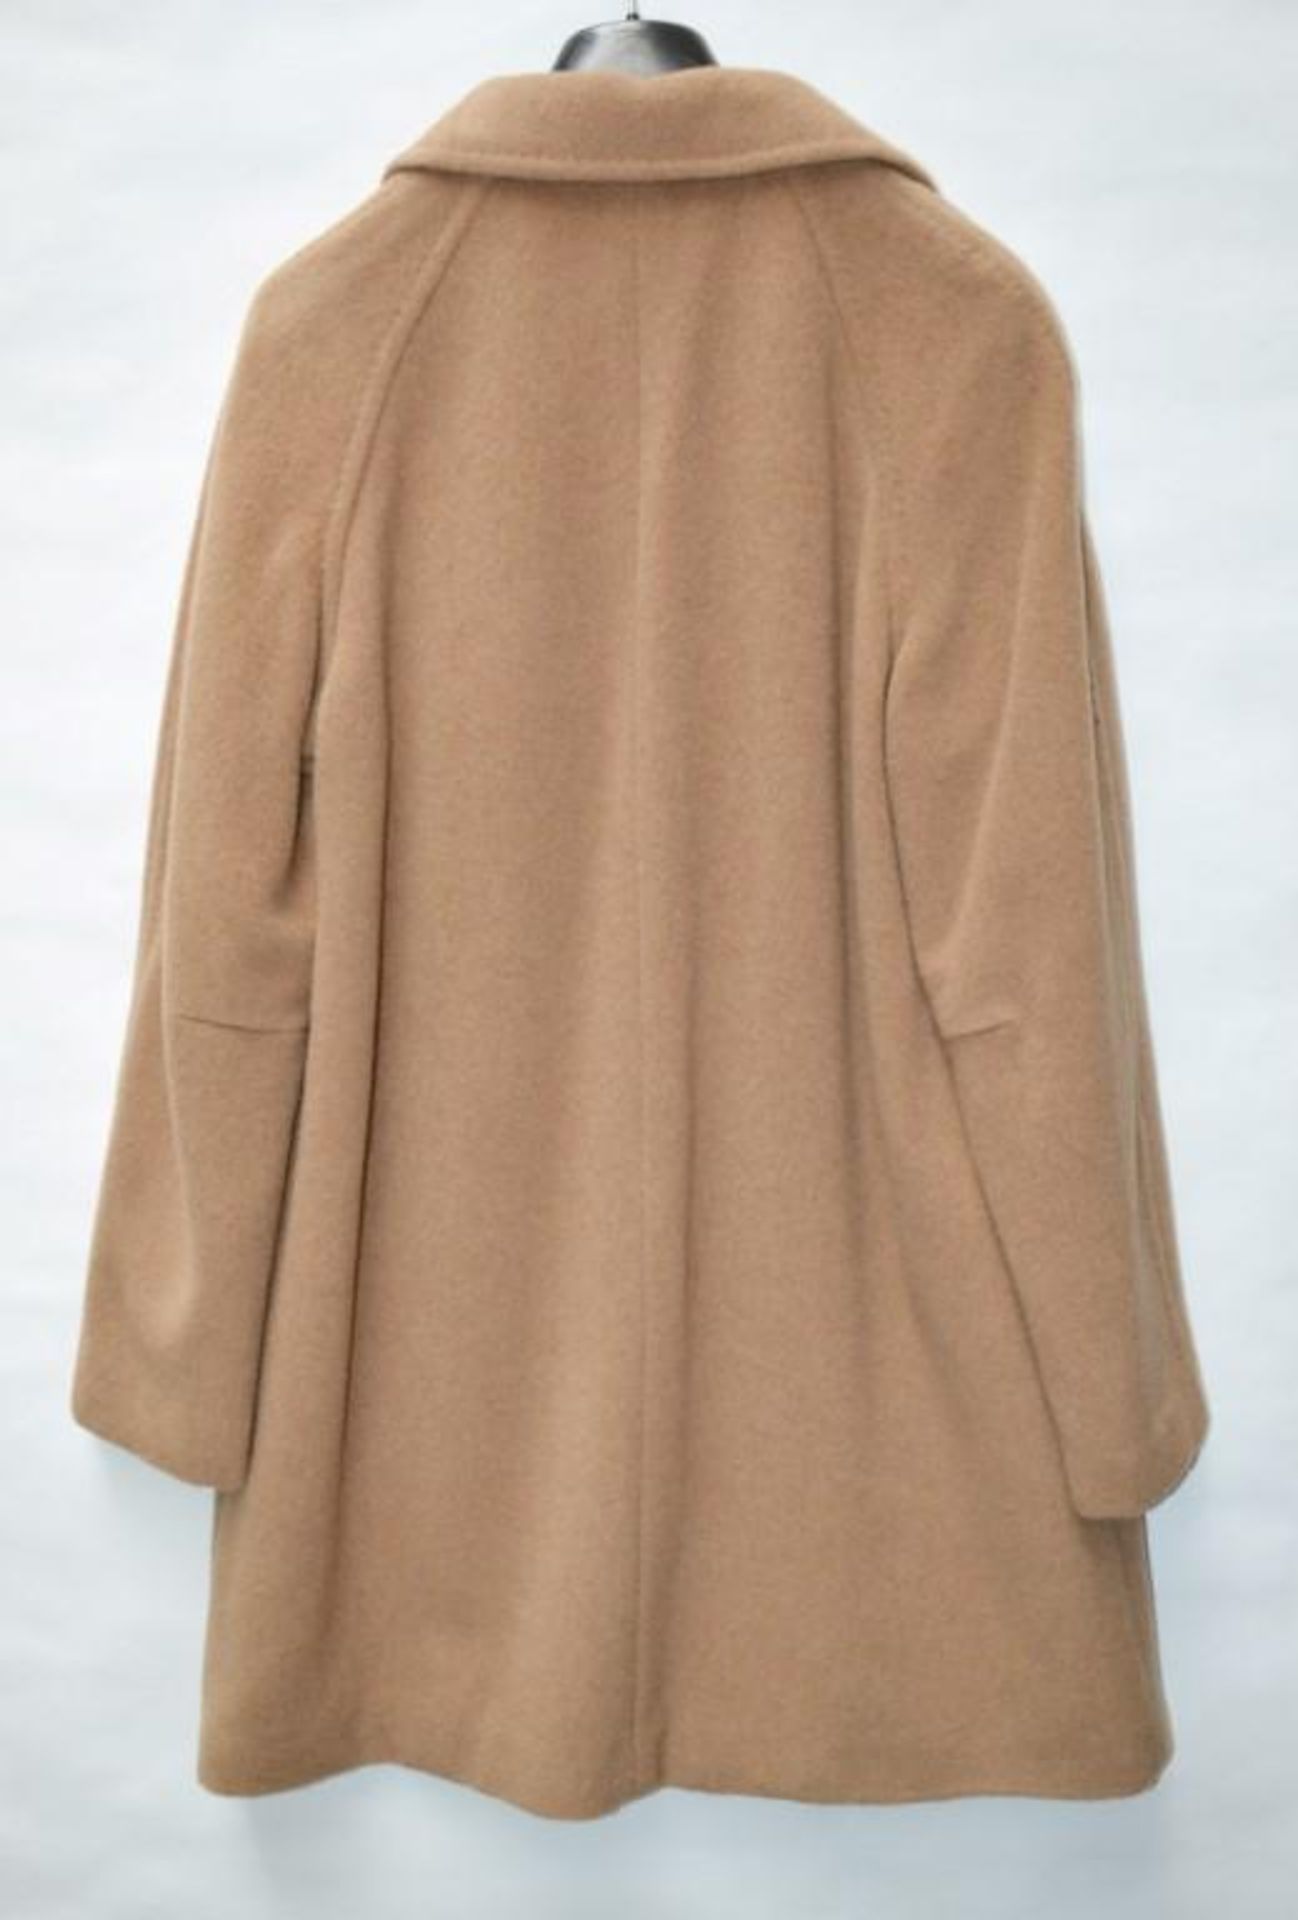 1 x Steilmann Kirsten Womens Knee-length Wool Blend Coat - Features False Pockets To Front - Size 12 - Image 2 of 3